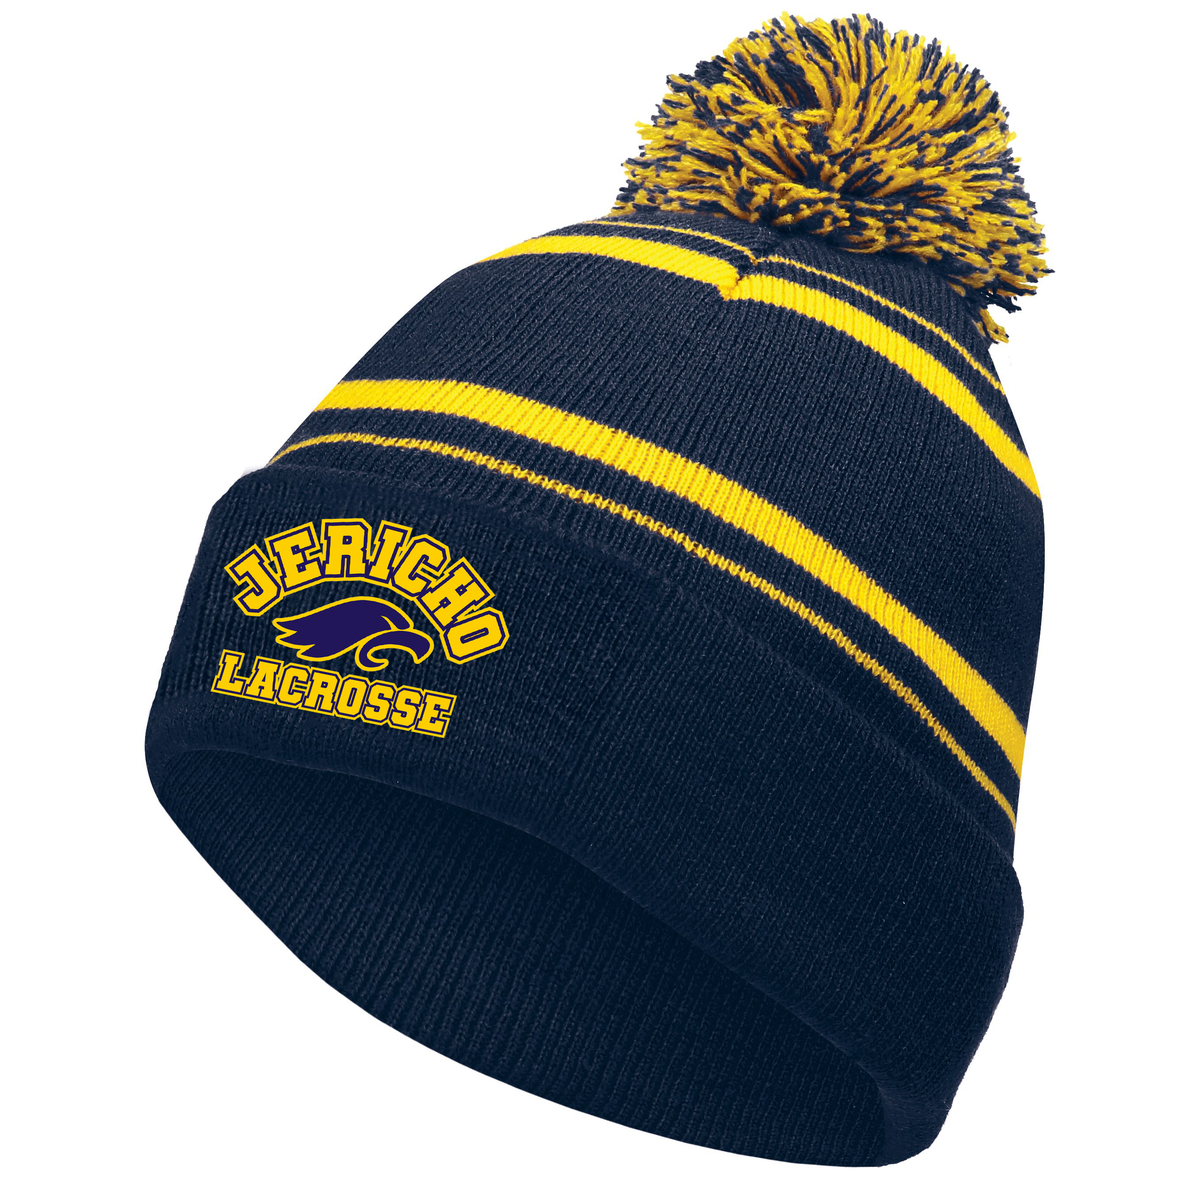 Jericho HS Lacrosse Homecoming Beanie